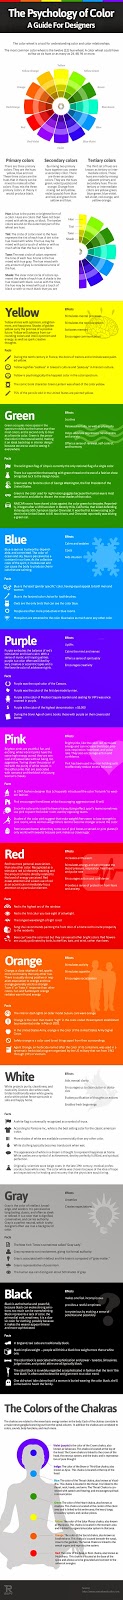 Psychology of Color : A Guide for Designers